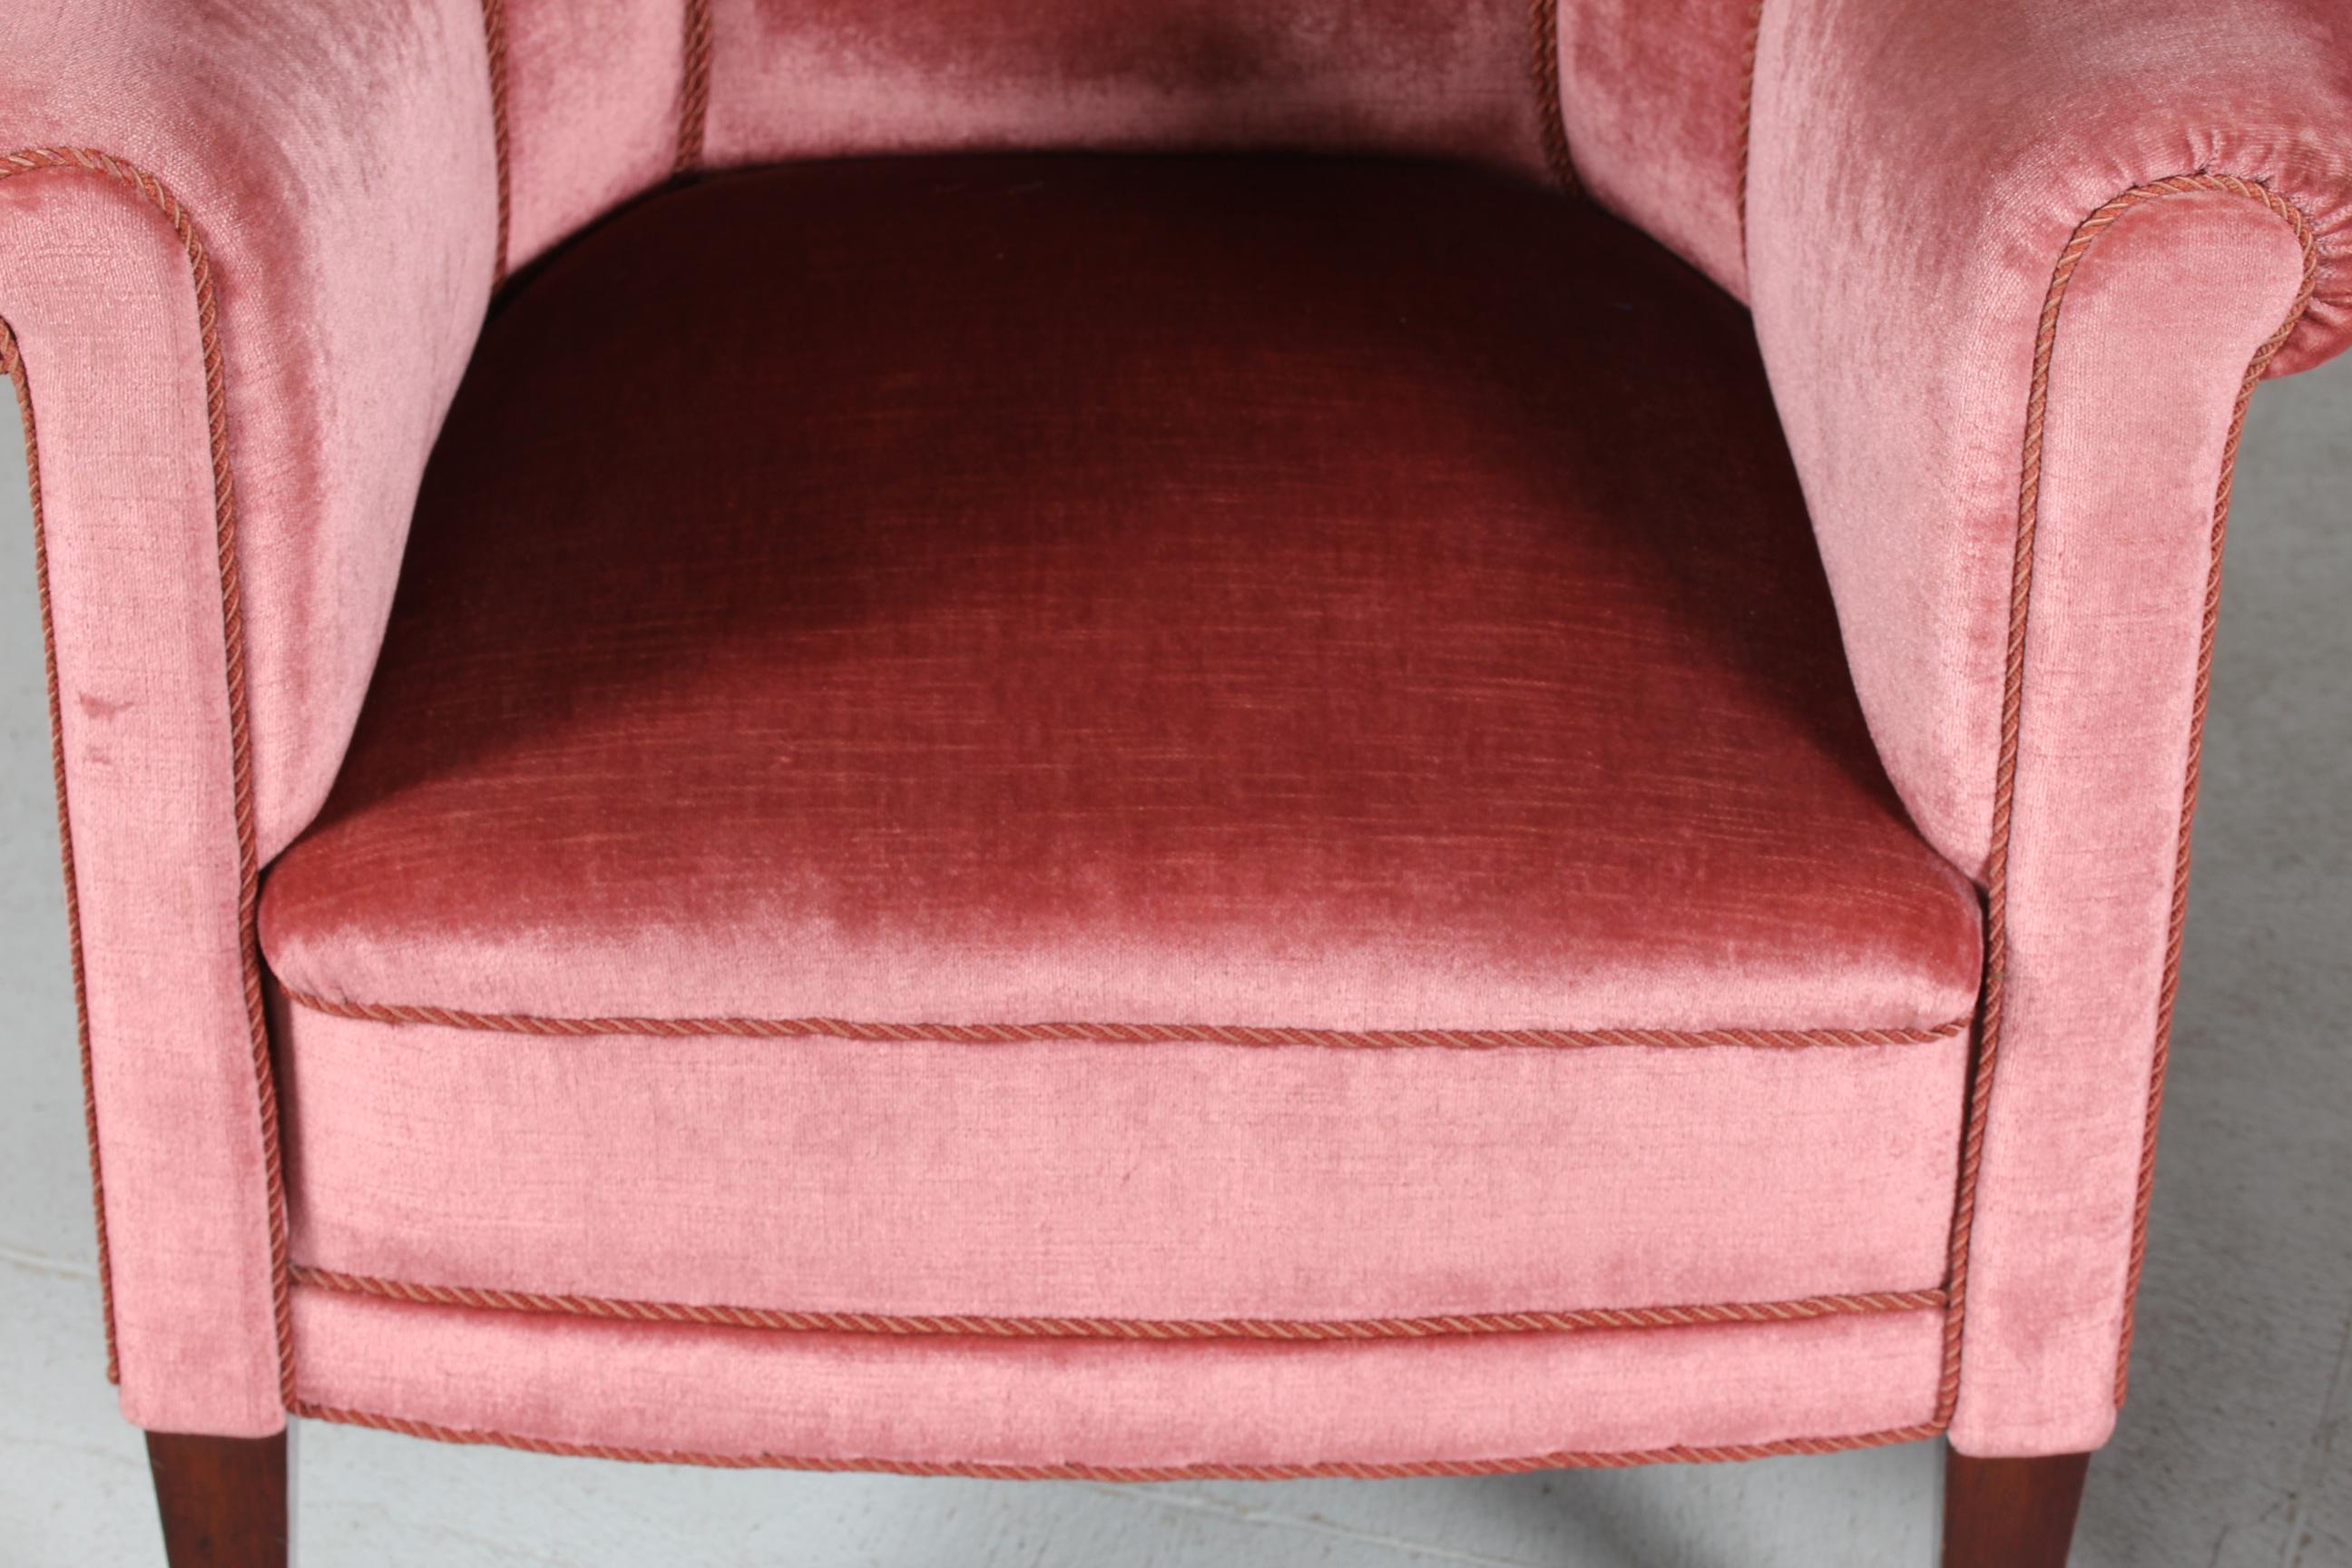 Mahogany Pair of Old Danish Chesterfield Club Lounge Chairs Upholstered Pink Velvet 1920s